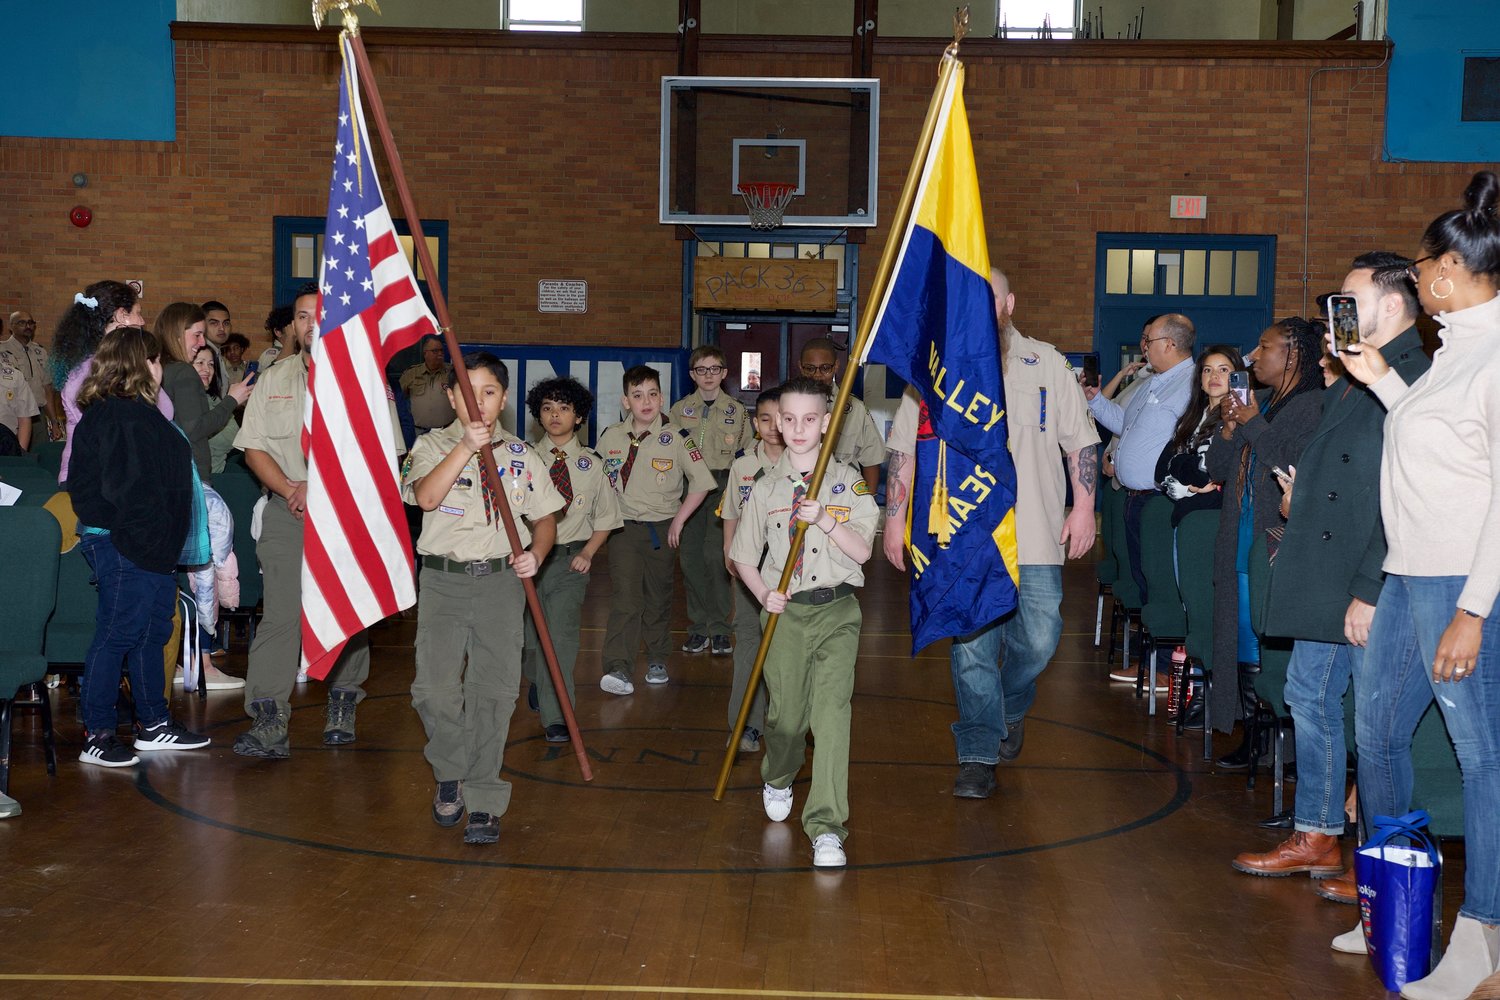 Scouts kicked off the day by carrying in the American Flag and Valley Stream scouts flag in front of their onlooking friends and family.